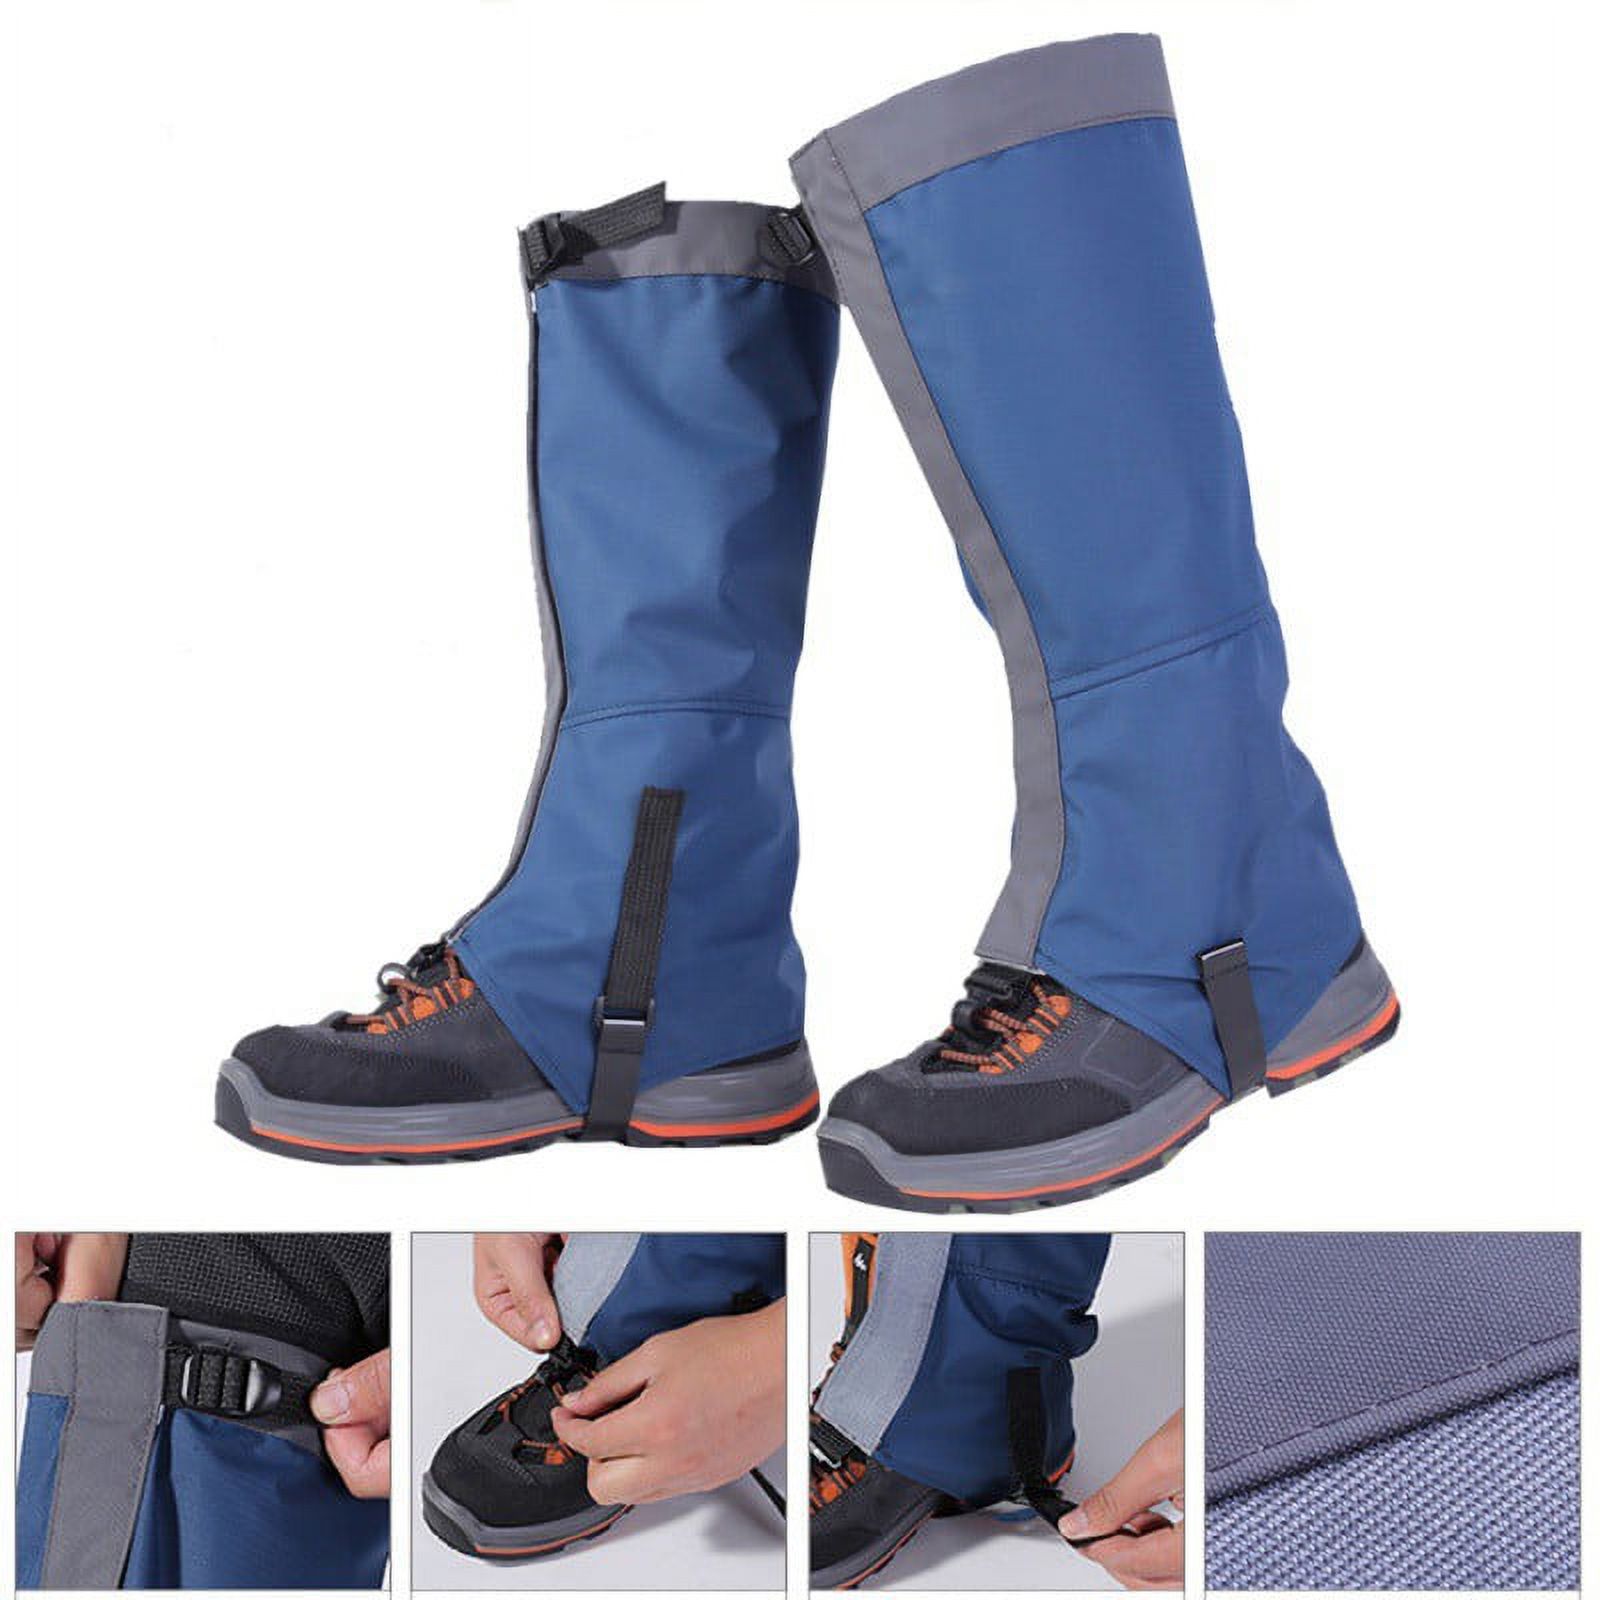 Outdoor Mountain Hiking Hunting Boot Gaiters Waterproof Snow Snake High Leg Shoes Cover - image 4 of 9